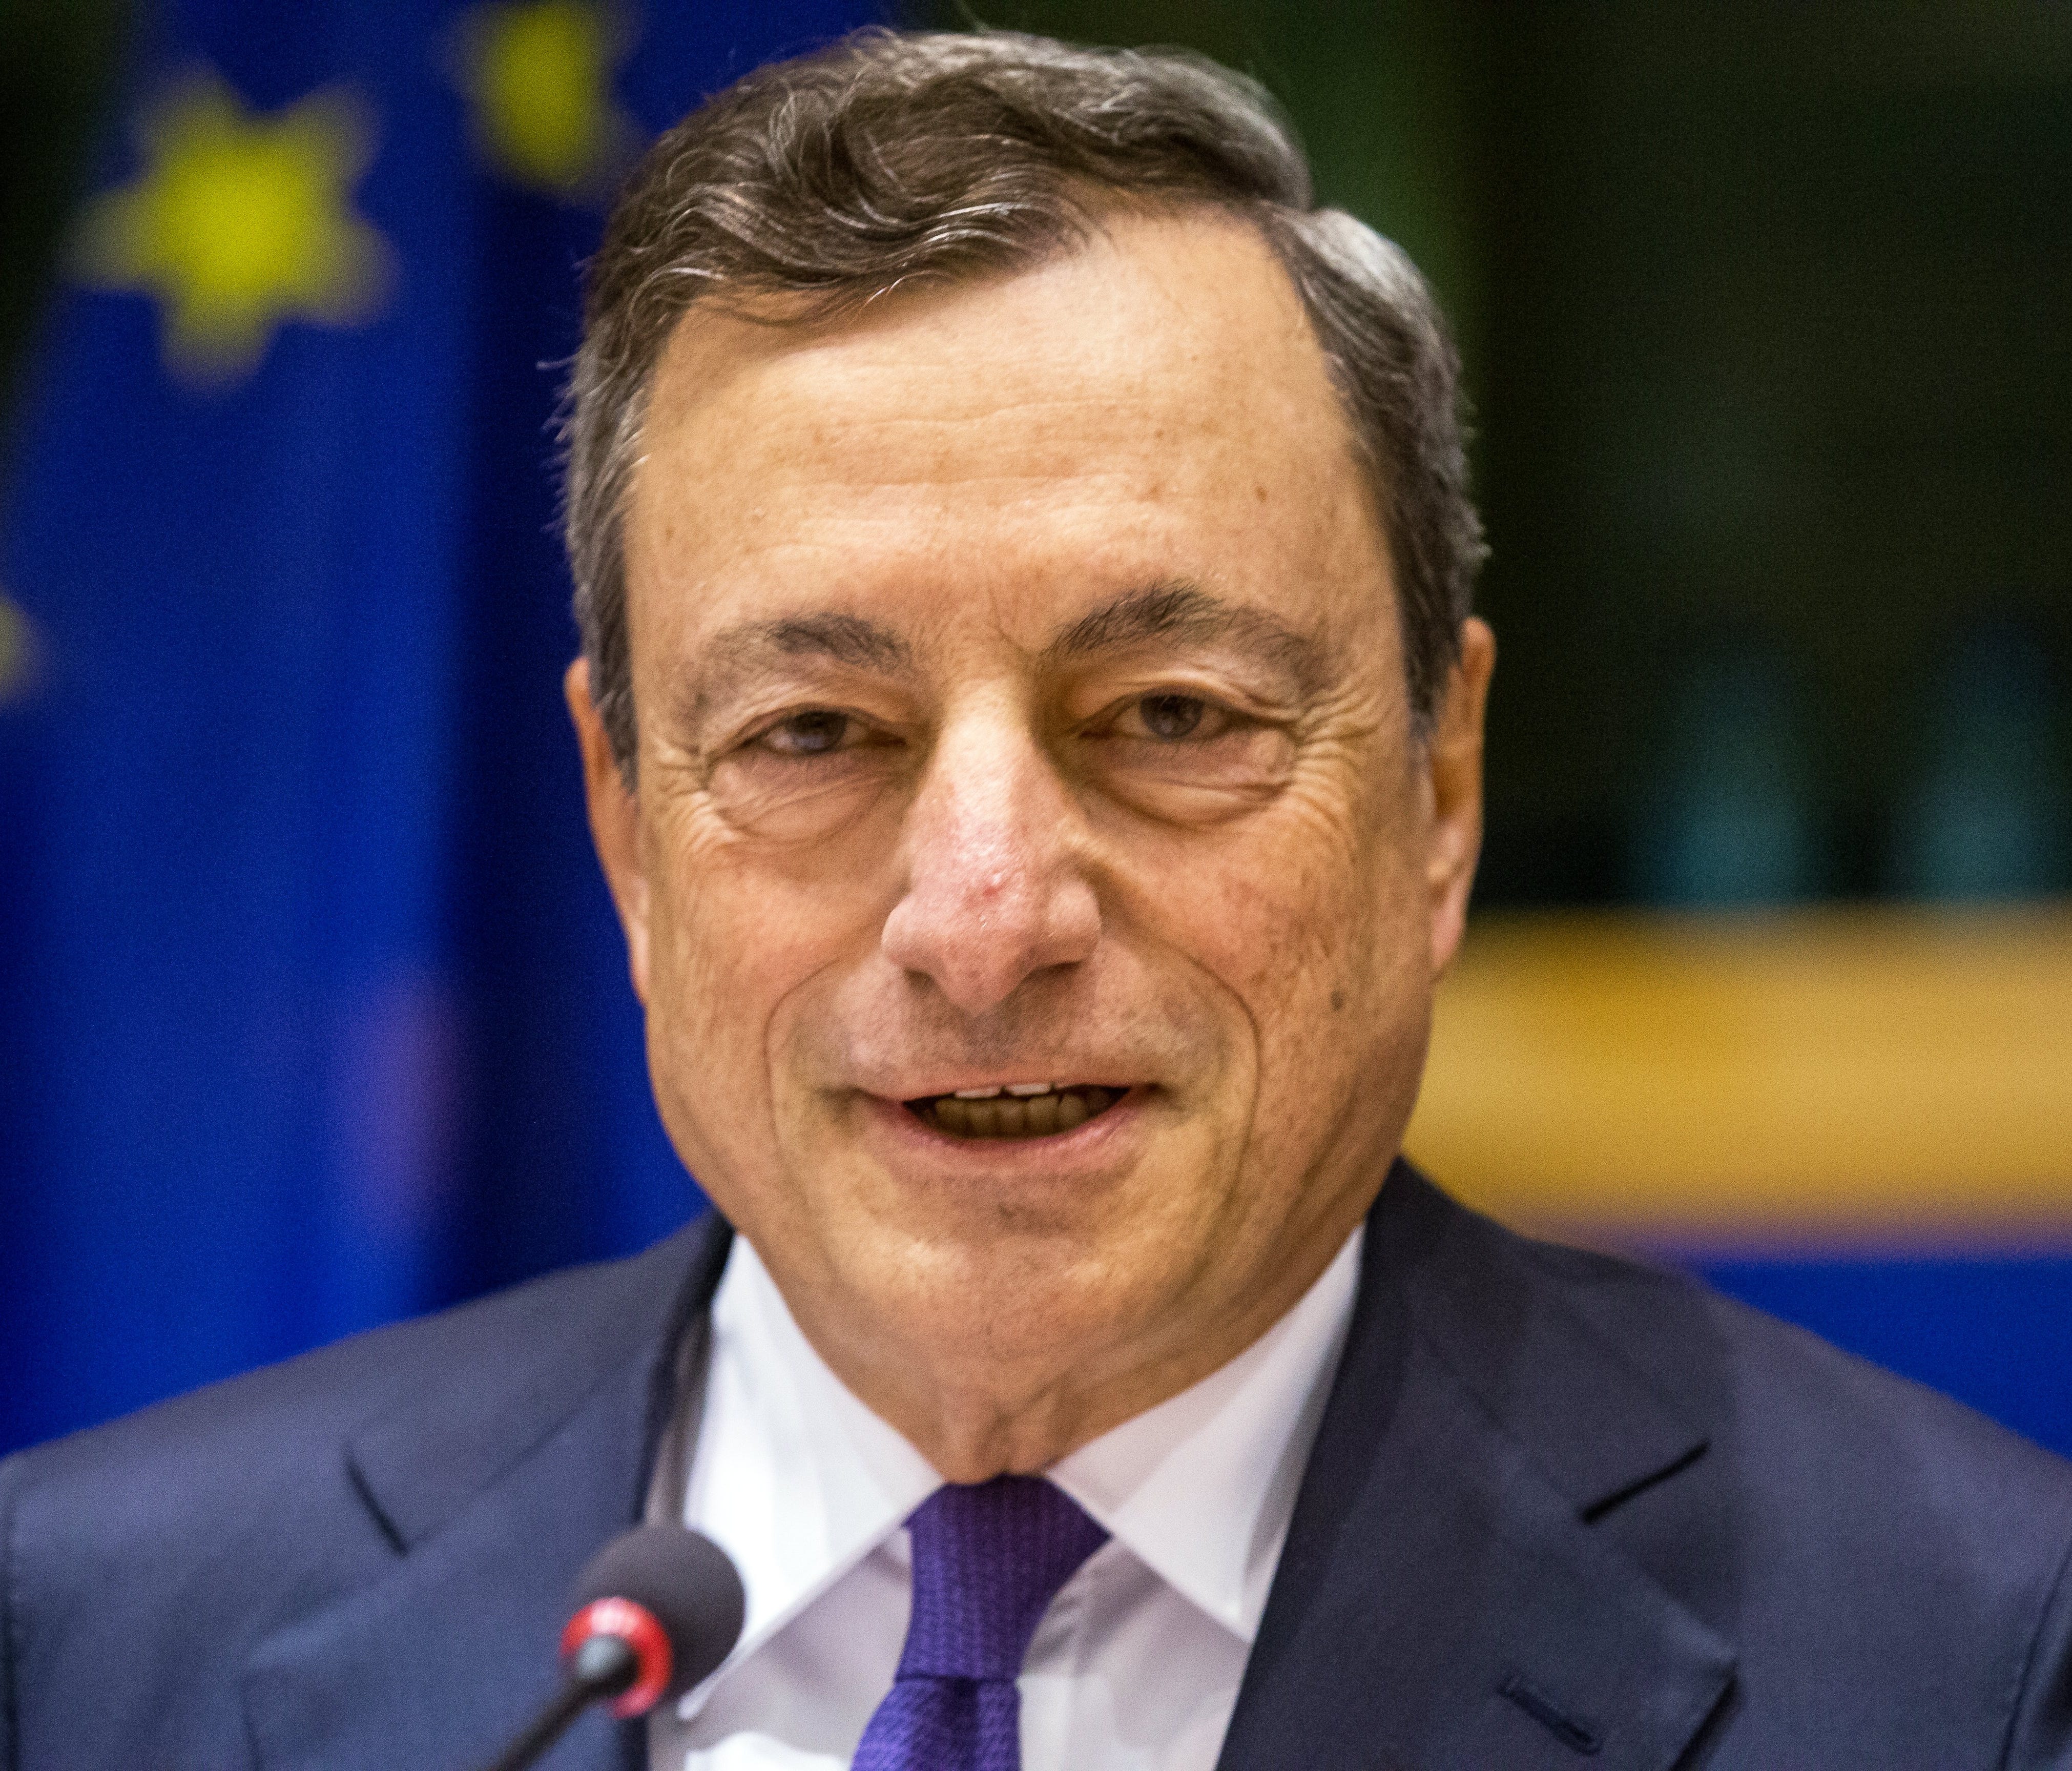 European Central Bank Pres. Mario Draghi scheduled to speak at the Federal Reserve's annual symposium in Jackson Hole, Wyo., Friday.